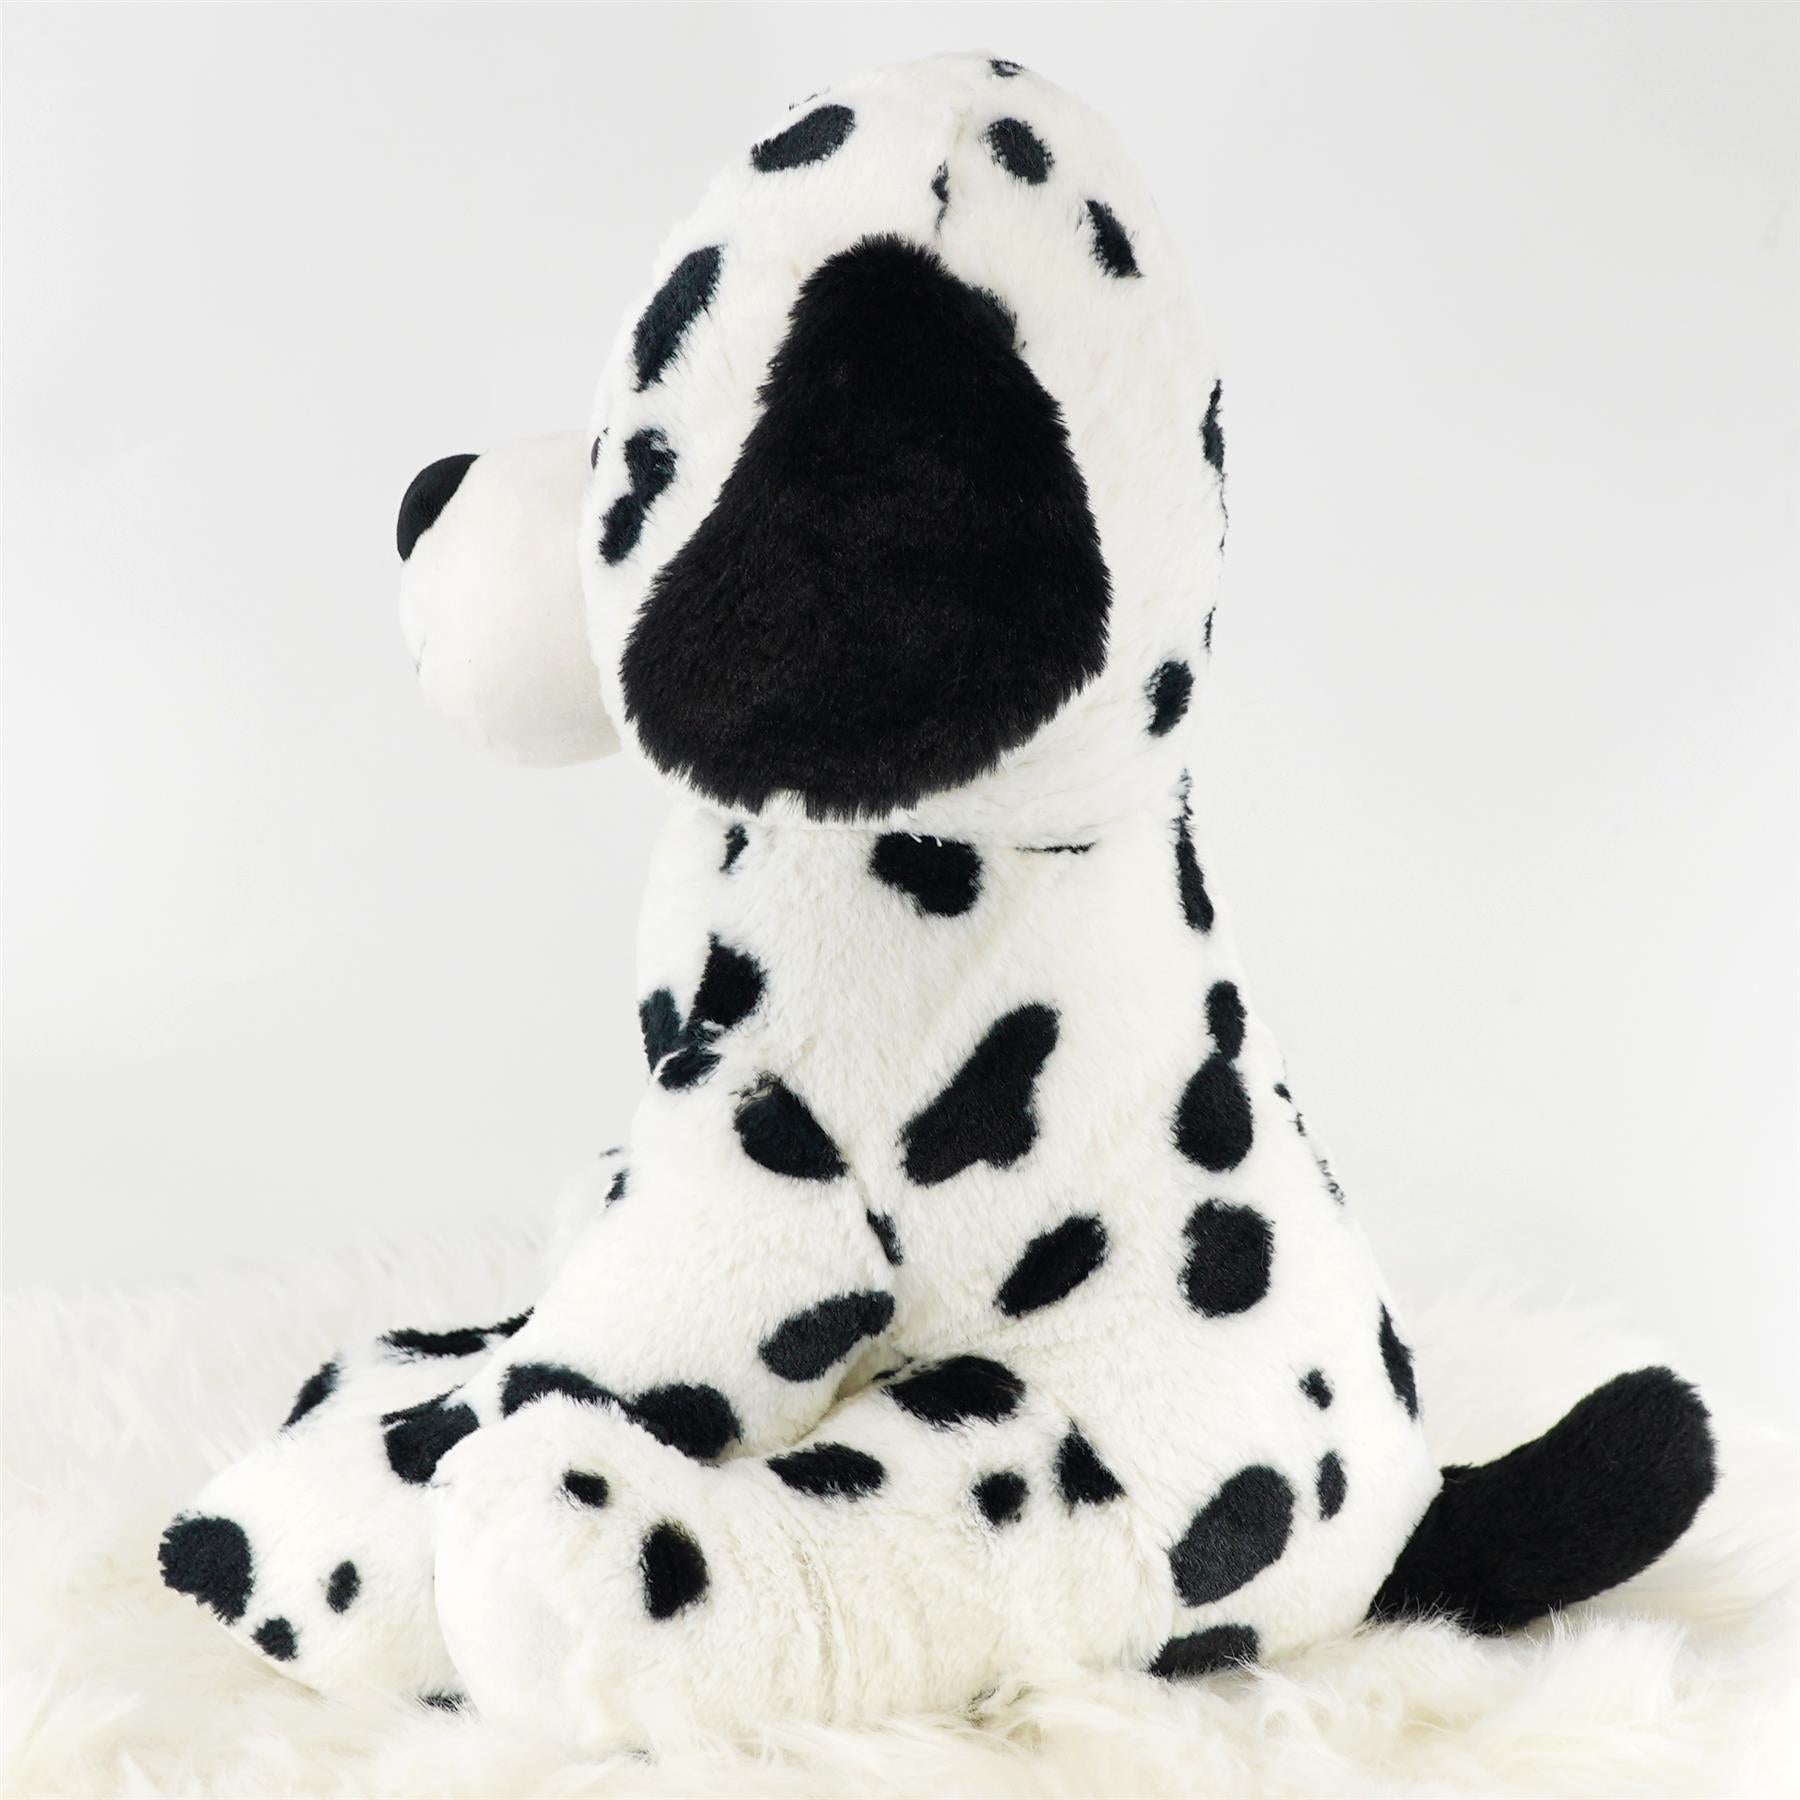 15" Plush Puppy Soft Dalmatian Dog Toy by The Magic Toy Shop - The Magic Toy Shop